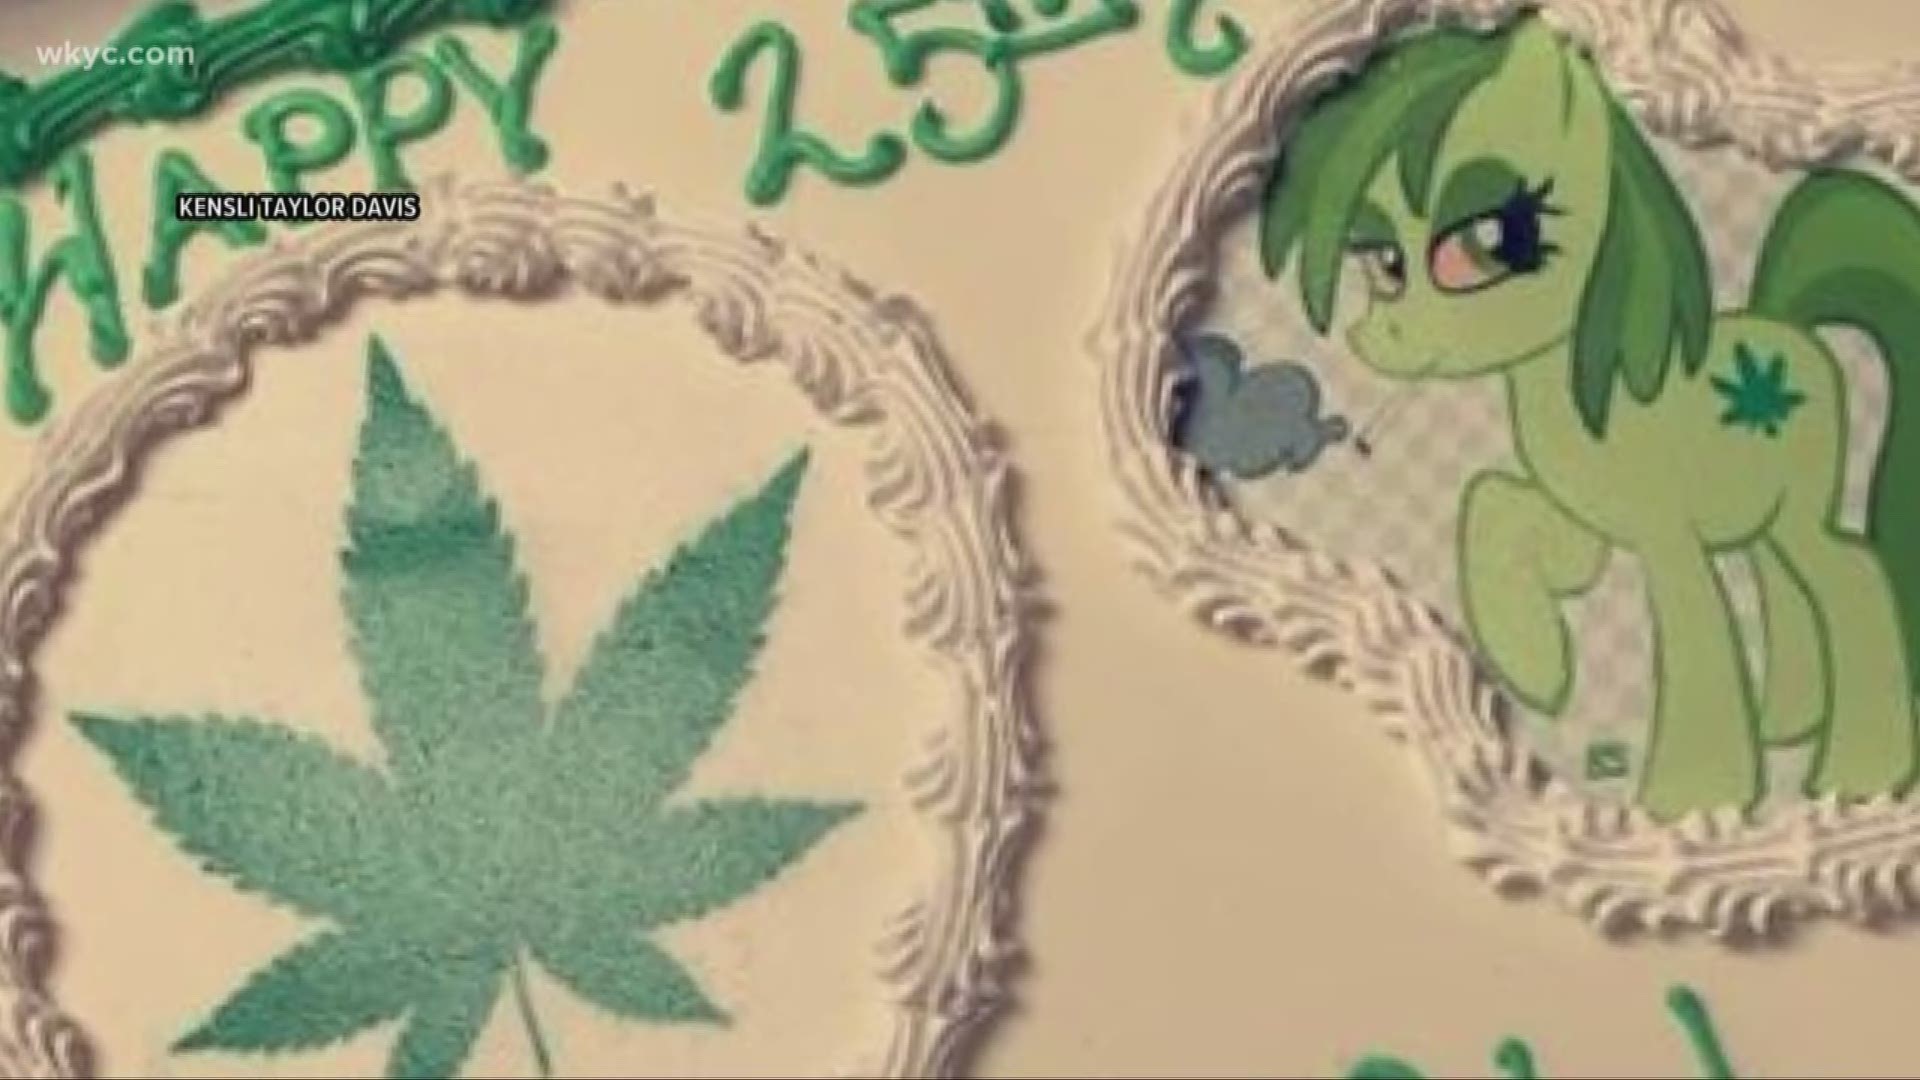 July 11, 2019: It's a mistake this Georgia family will never forget. When ordering a 'Moana'-themed birthday cake, the baker mistakenly thought they requested a marijuana design.